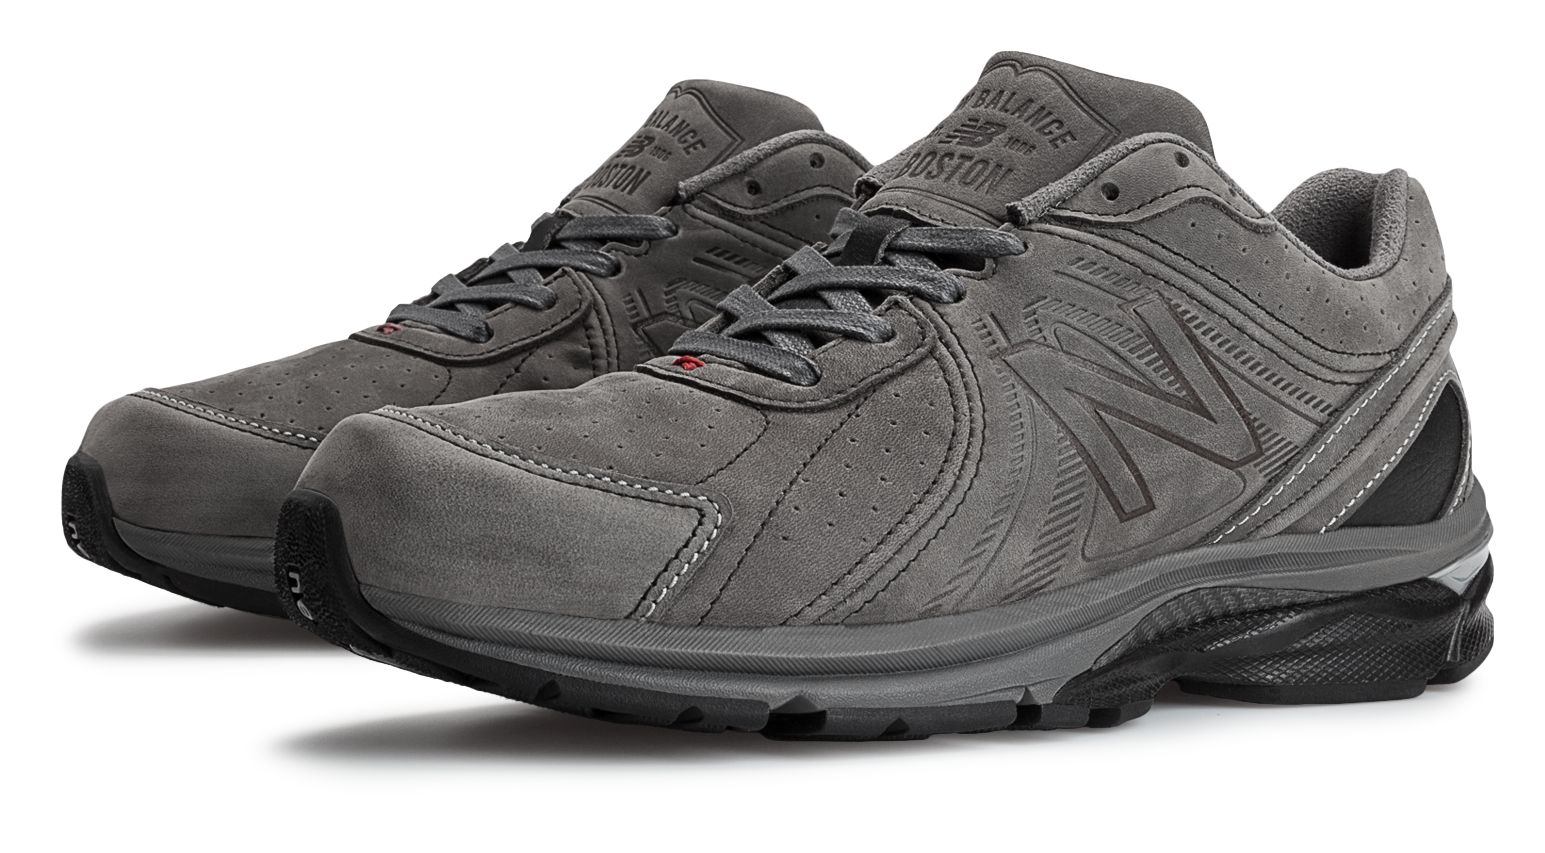 New Balance M2040-V2 on Sale - Discounts Up to 79% Off on M2040GL2 at Joe's  New Balance Outlet